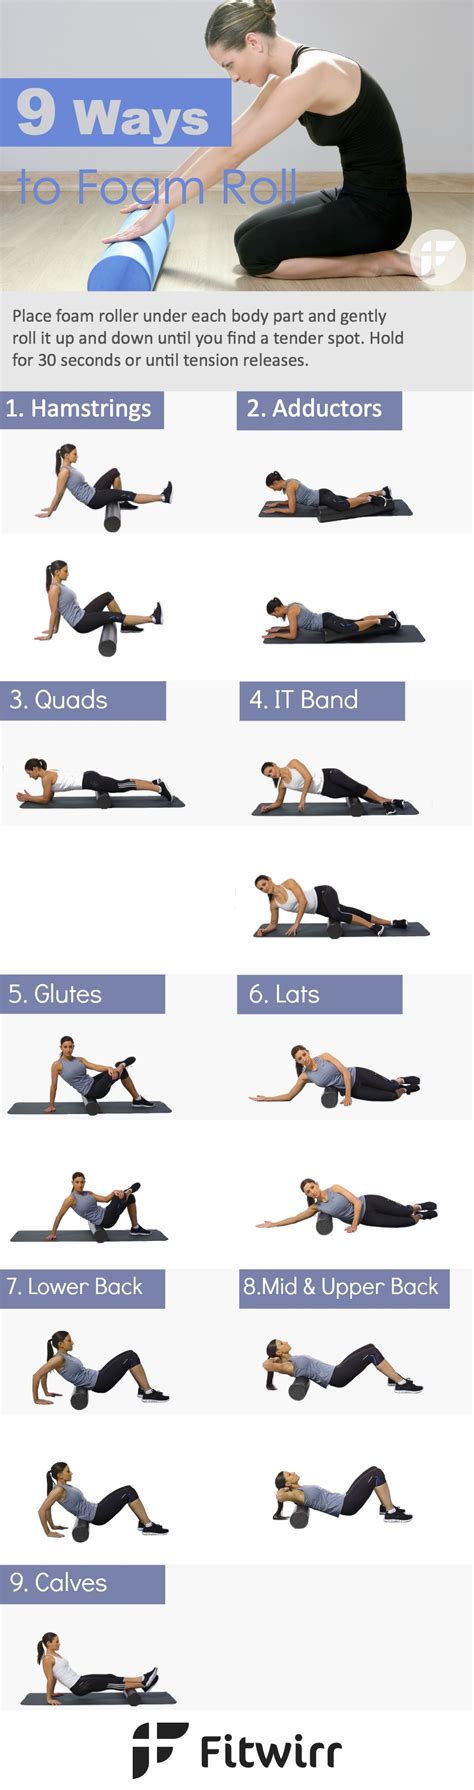 Use the foam roller on its own to release painful trigger points and tension in your back, or use it before inverting on a teeter to prime your back for decompression by working out the 'knots' beforehand, allowing for a deeper stretch and effortless back pain relief. 9 Best Foam Roller Exercises for Muscle Aches